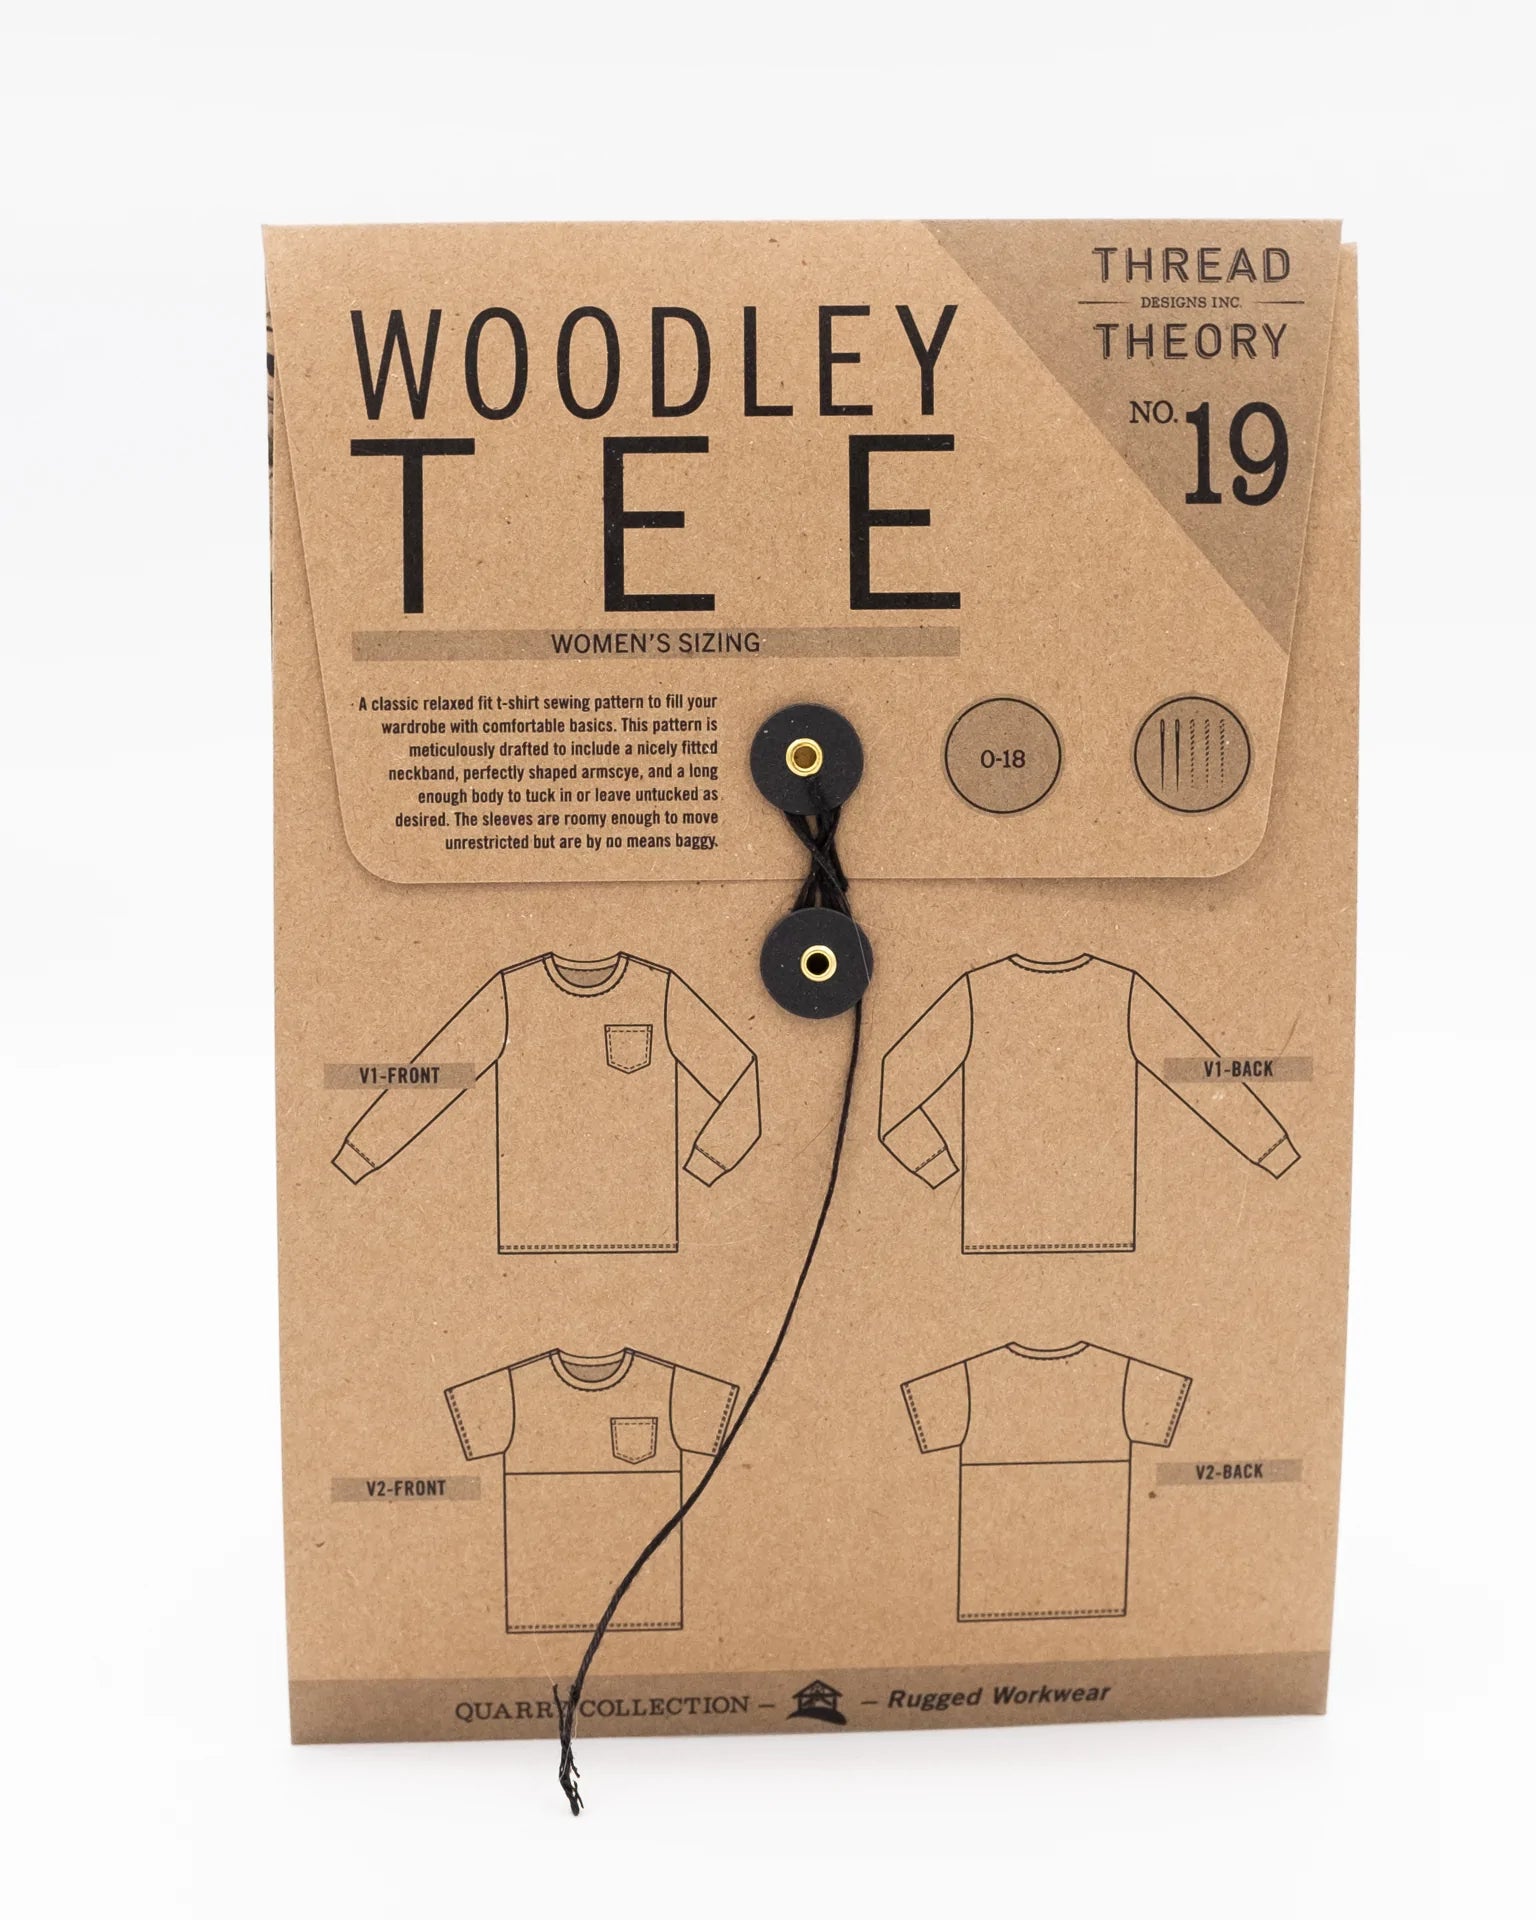 Thread Theory No 19 Woodley Tee (Women’s Sizing)